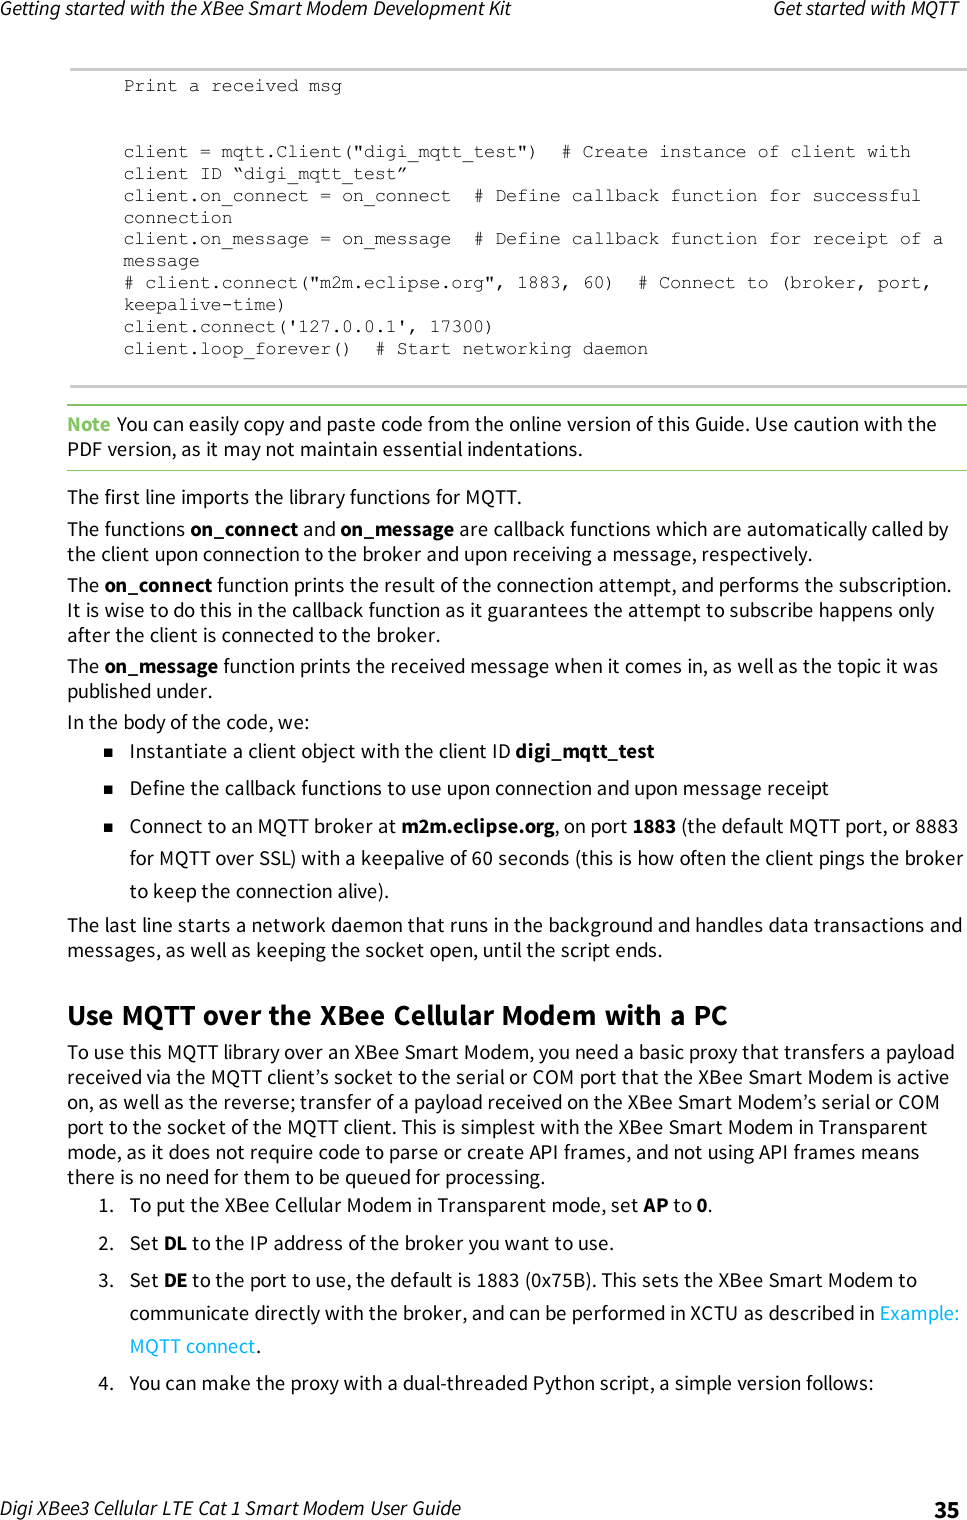 Getting started with the XBee Smart Modem Development Kit Get started with MQTTDigi XBee3 Cellular LTE Cat 1 Smart Modem User Guide 35Print a received msgclient = mqtt.Client(&quot;digi_mqtt_test&quot;) # Create instance of client withclient ID “digi_mqtt_test”client.on_connect = on_connect # Define callback function for successfulconnectionclient.on_message = on_message # Define callback function for receipt of amessage# client.connect(&quot;m2m.eclipse.org&quot;, 1883, 60) # Connect to (broker, port,keepalive-time)client.connect(&apos;127.0.0.1&apos;, 17300)client.loop_forever() # Start networking daemonNote You can easily copy and paste code from the online version of this Guide. Use caution with thePDF version, as it may not maintain essential indentations.The first line imports the library functions for MQTT.The functions on_connect and on_message are callback functions which are automatically called bythe client upon connection to the broker and upon receiving a message, respectively.The on_connect function prints the result of the connection attempt, and performs the subscription.It is wise to do this in the callback function as it guarantees the attempt to subscribe happens onlyafter the client is connected to the broker.The on_message function prints the received message when it comes in, as well as the topic it waspublished under.In the body of the code, we:nInstantiate a client object with the client ID digi_mqtt_testnDefine the callback functions to use upon connection and upon message receiptnConnect to an MQTT broker at m2m.eclipse.org, on port 1883 (the default MQTT port, or 8883for MQTT over SSL) with a keepalive of 60 seconds (this is how often the client pings the brokerto keep the connection alive).The last line starts a network daemon that runs in the background and handles data transactions andmessages, as well as keeping the socket open, until the script ends.Use MQTT over the XBee Cellular Modem with a PCTo use this MQTT library over an XBee Smart Modem, you need a basic proxy that transfers a payloadreceived via the MQTT client’s socket to the serial or COM port that the XBee Smart Modem is activeon, as well as the reverse; transfer of a payload received on the XBee Smart Modem’s serial or COMport to the socket of the MQTT client. This is simplest with the XBee Smart Modem in Transparentmode, as it does not require code to parse or create API frames, and not using API frames meansthere is no need for them to be queued for processing.1. To put the XBee Cellular Modem in Transparent mode, set AP to 0.2. Set DL to the IP address of the broker you want to use.3. Set DE to the port to use, the default is 1883 (0x75B). This sets the XBee Smart Modem tocommunicate directly with the broker, and can be performed in XCTU as described in Example:MQTT connect.4. You can make the proxy with a dual-threaded Python script, a simple version follows: